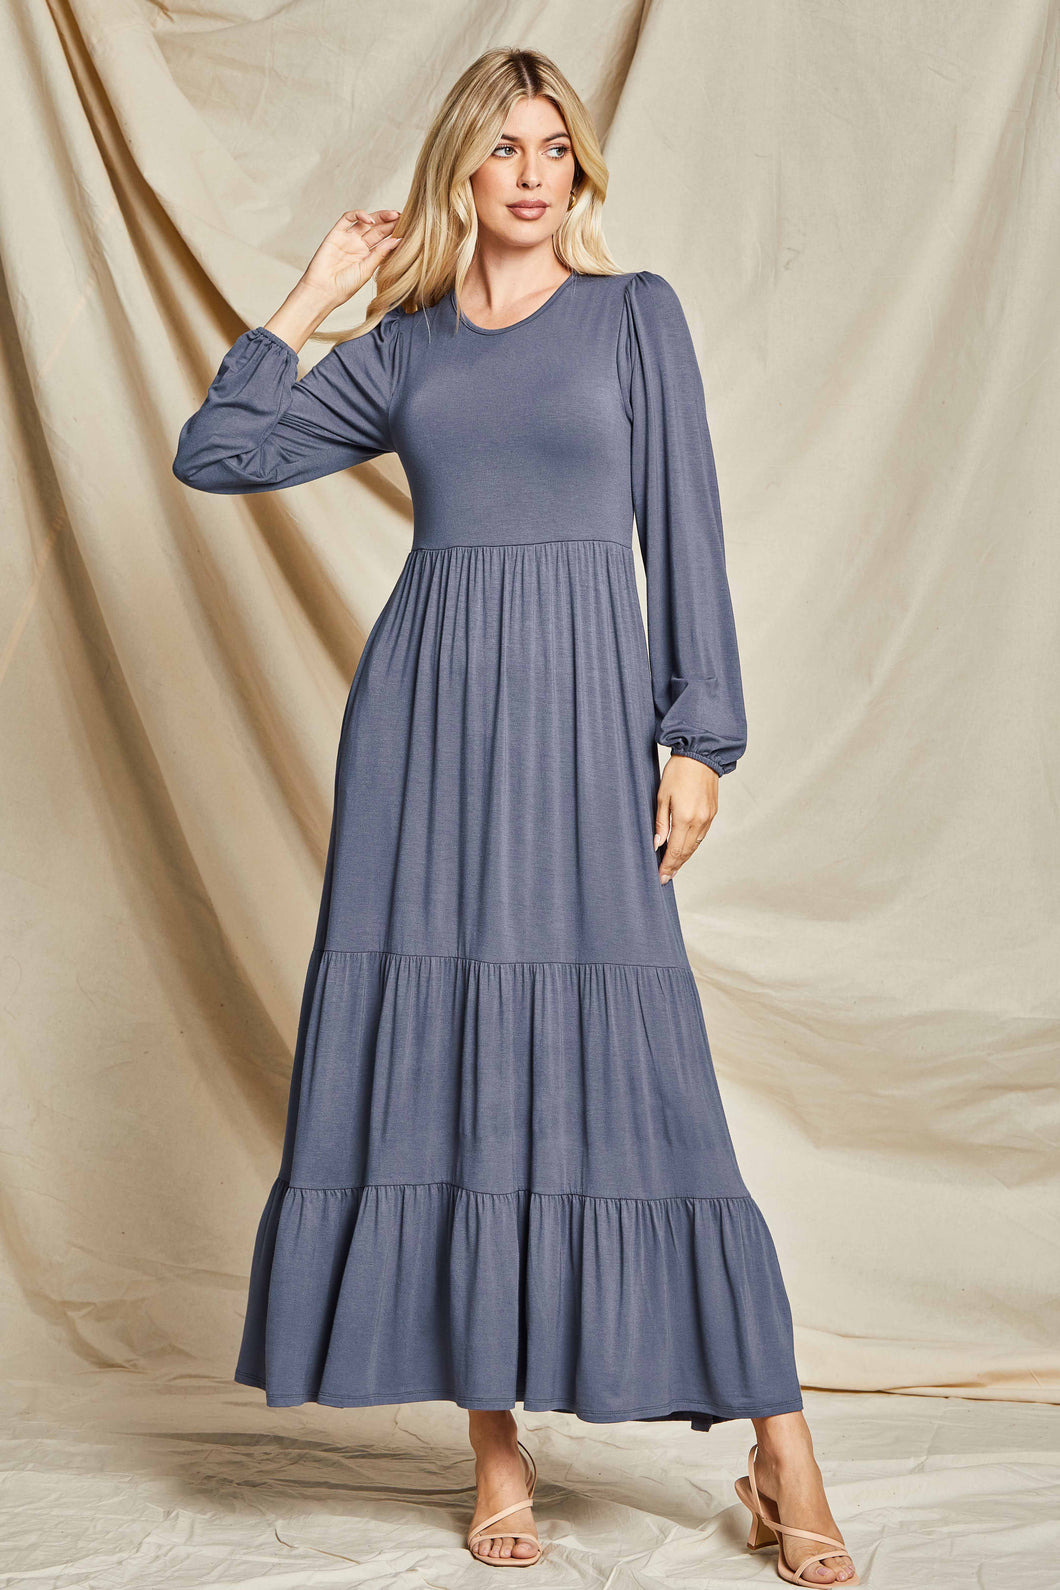 Tiered Maxi Dress Style 3802 in Navy